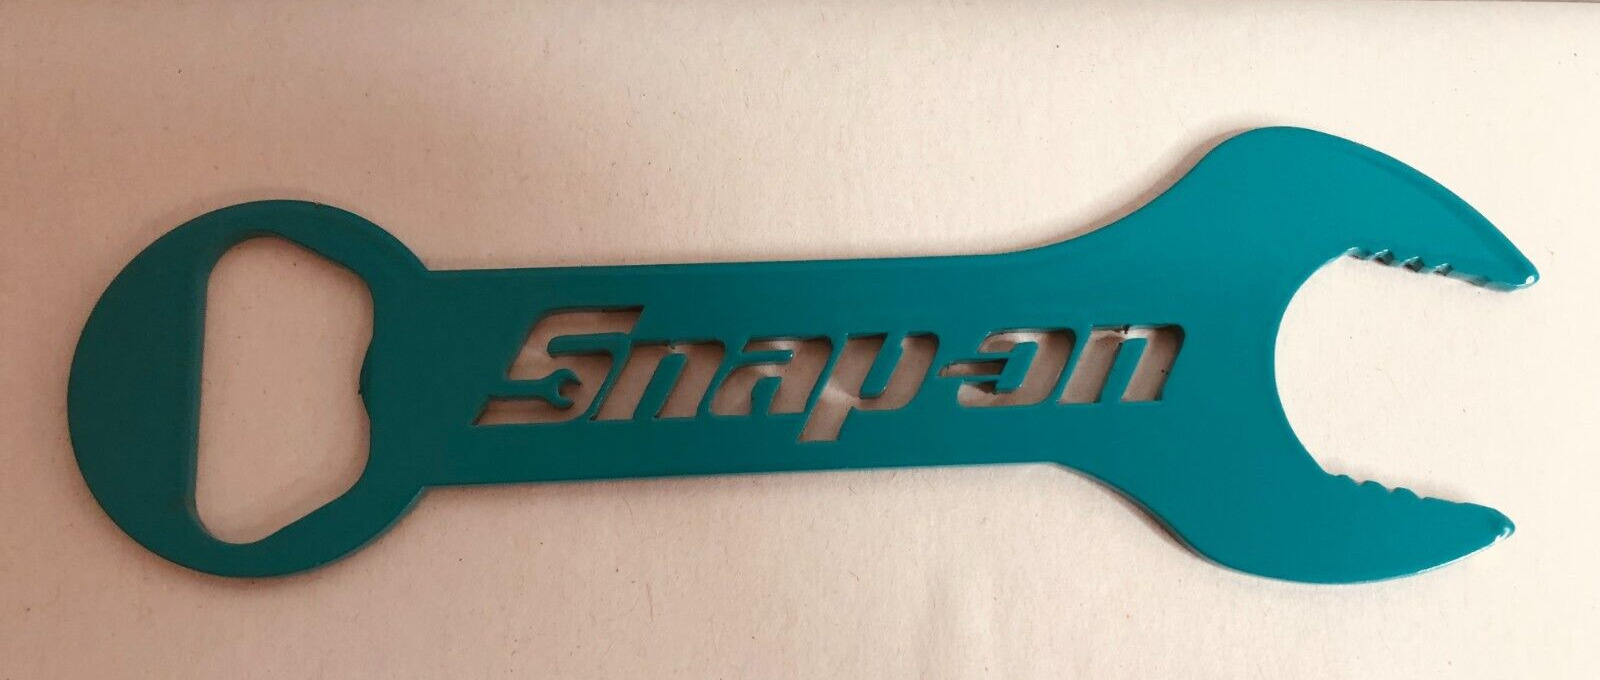 Snap-On Wrench Bottle Opener Flat Metal Wrench Twist Off & Pull Off - Blue/Green